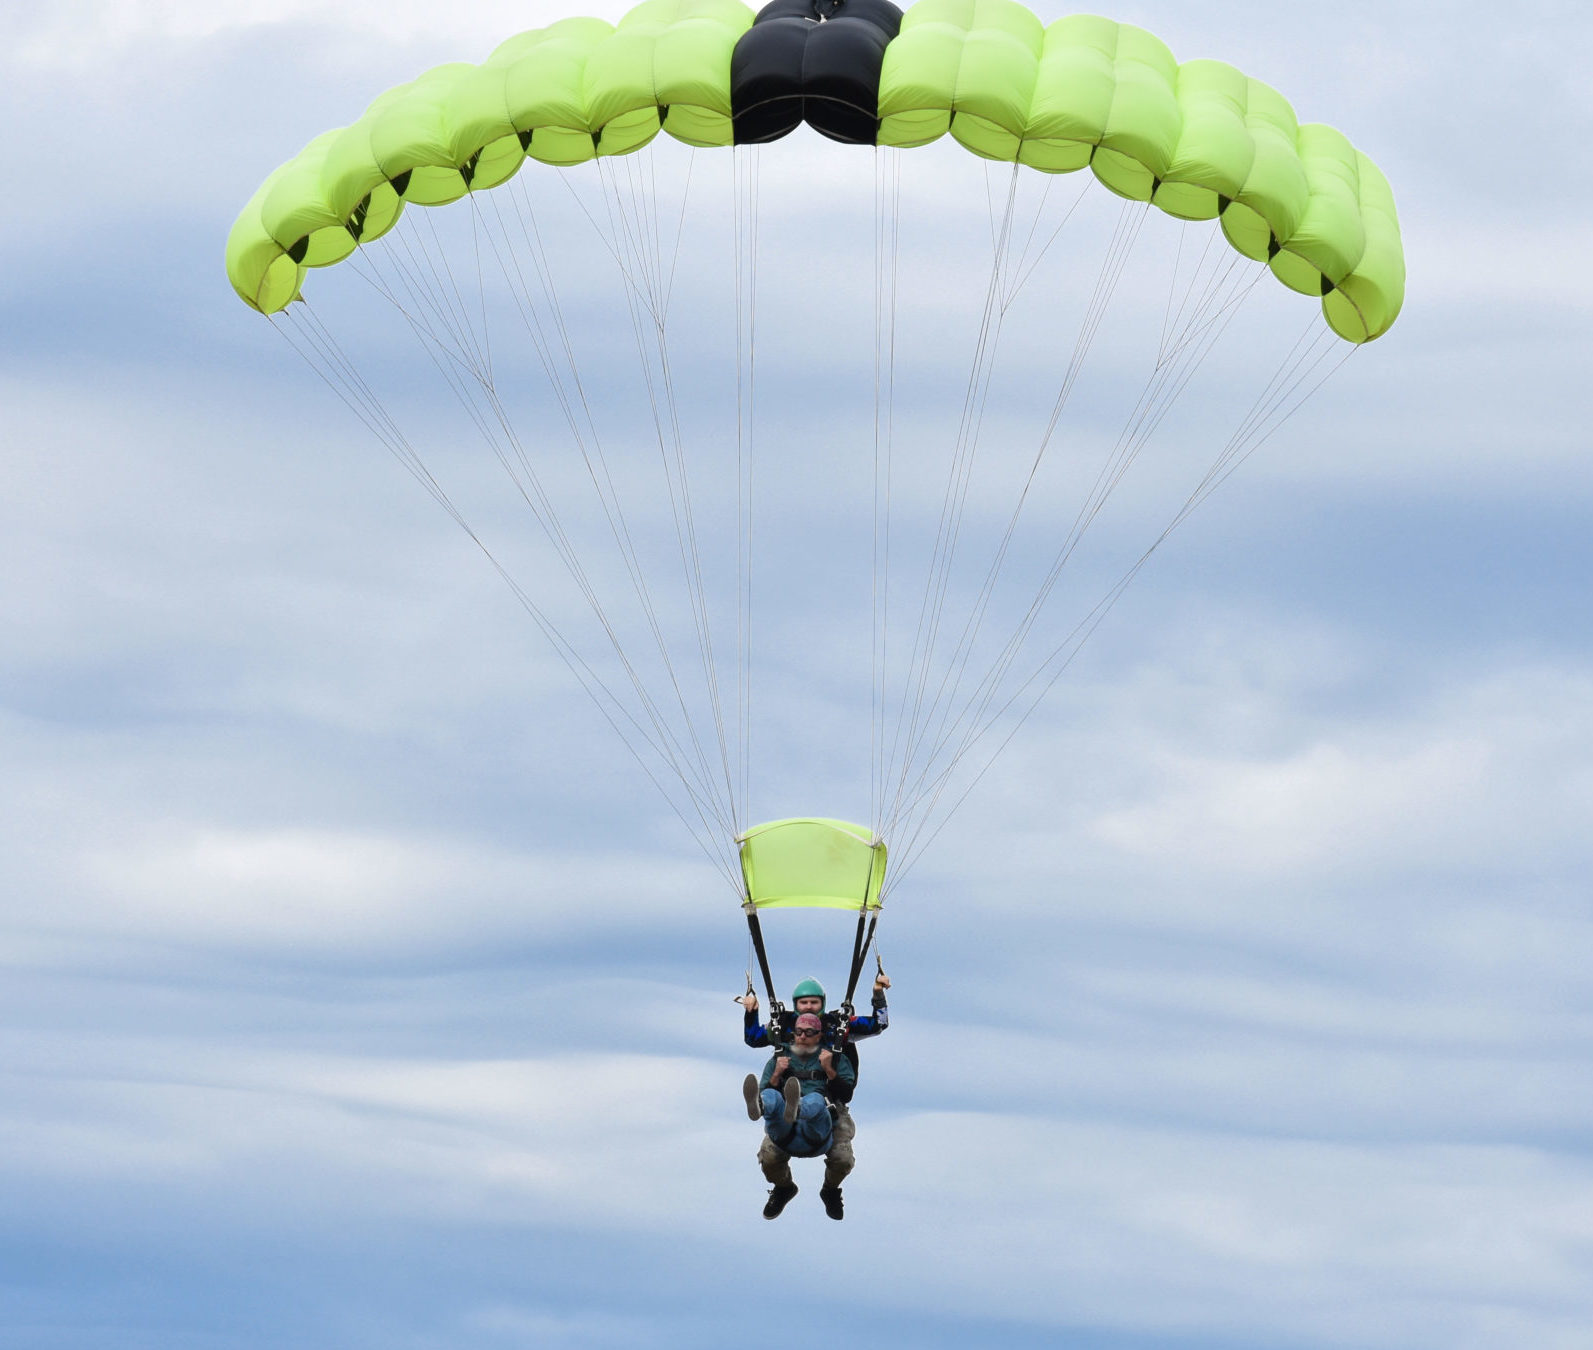 Contact Music City Skydiving about Tandem Skydiving in Tennessee